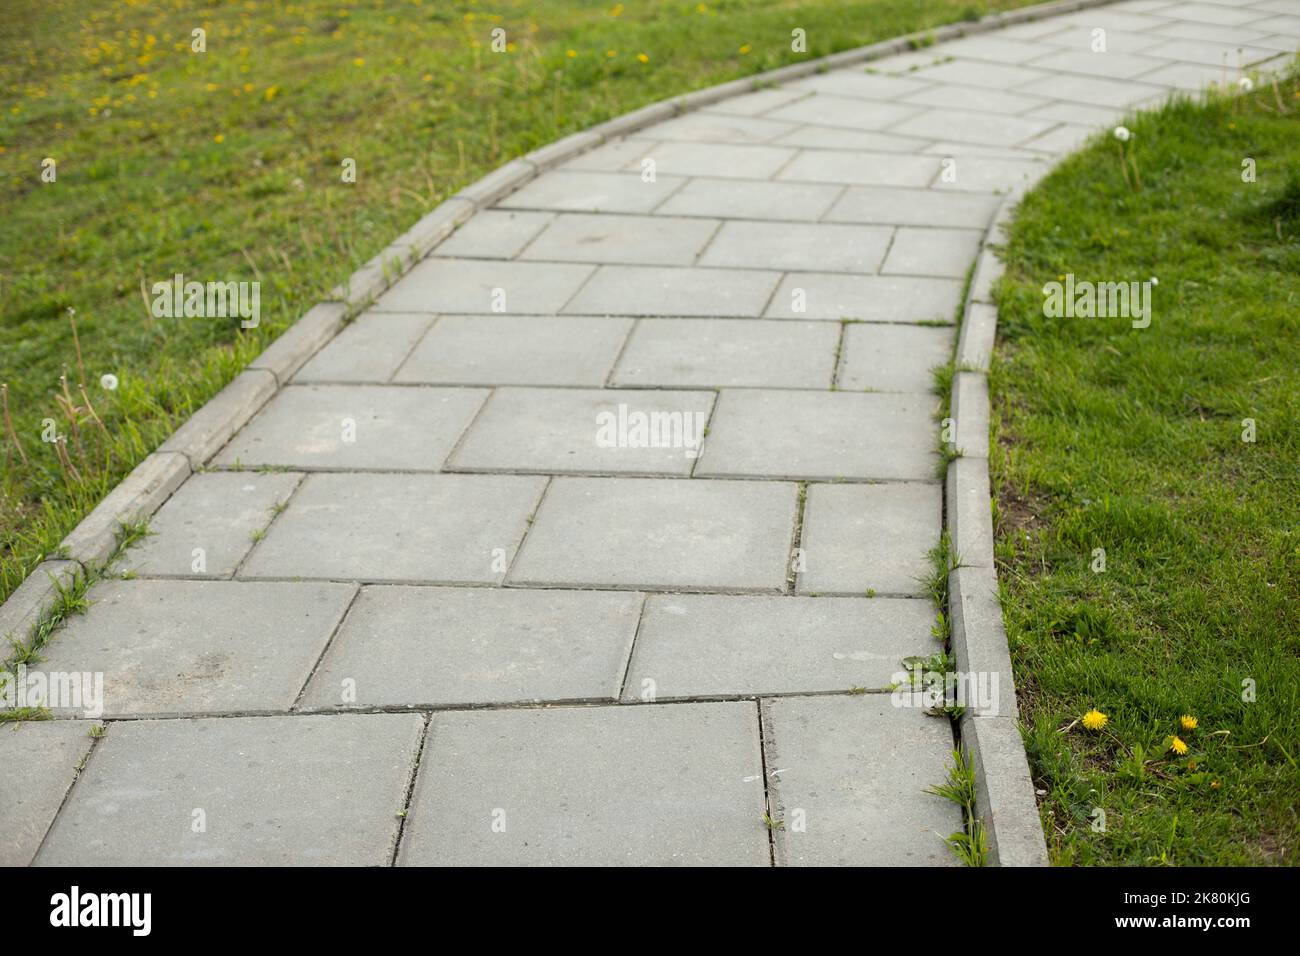 Path in park. Tile trail through park. Details of pedestrian zone. Place for walking. Tiles made of stone. Stock Photo